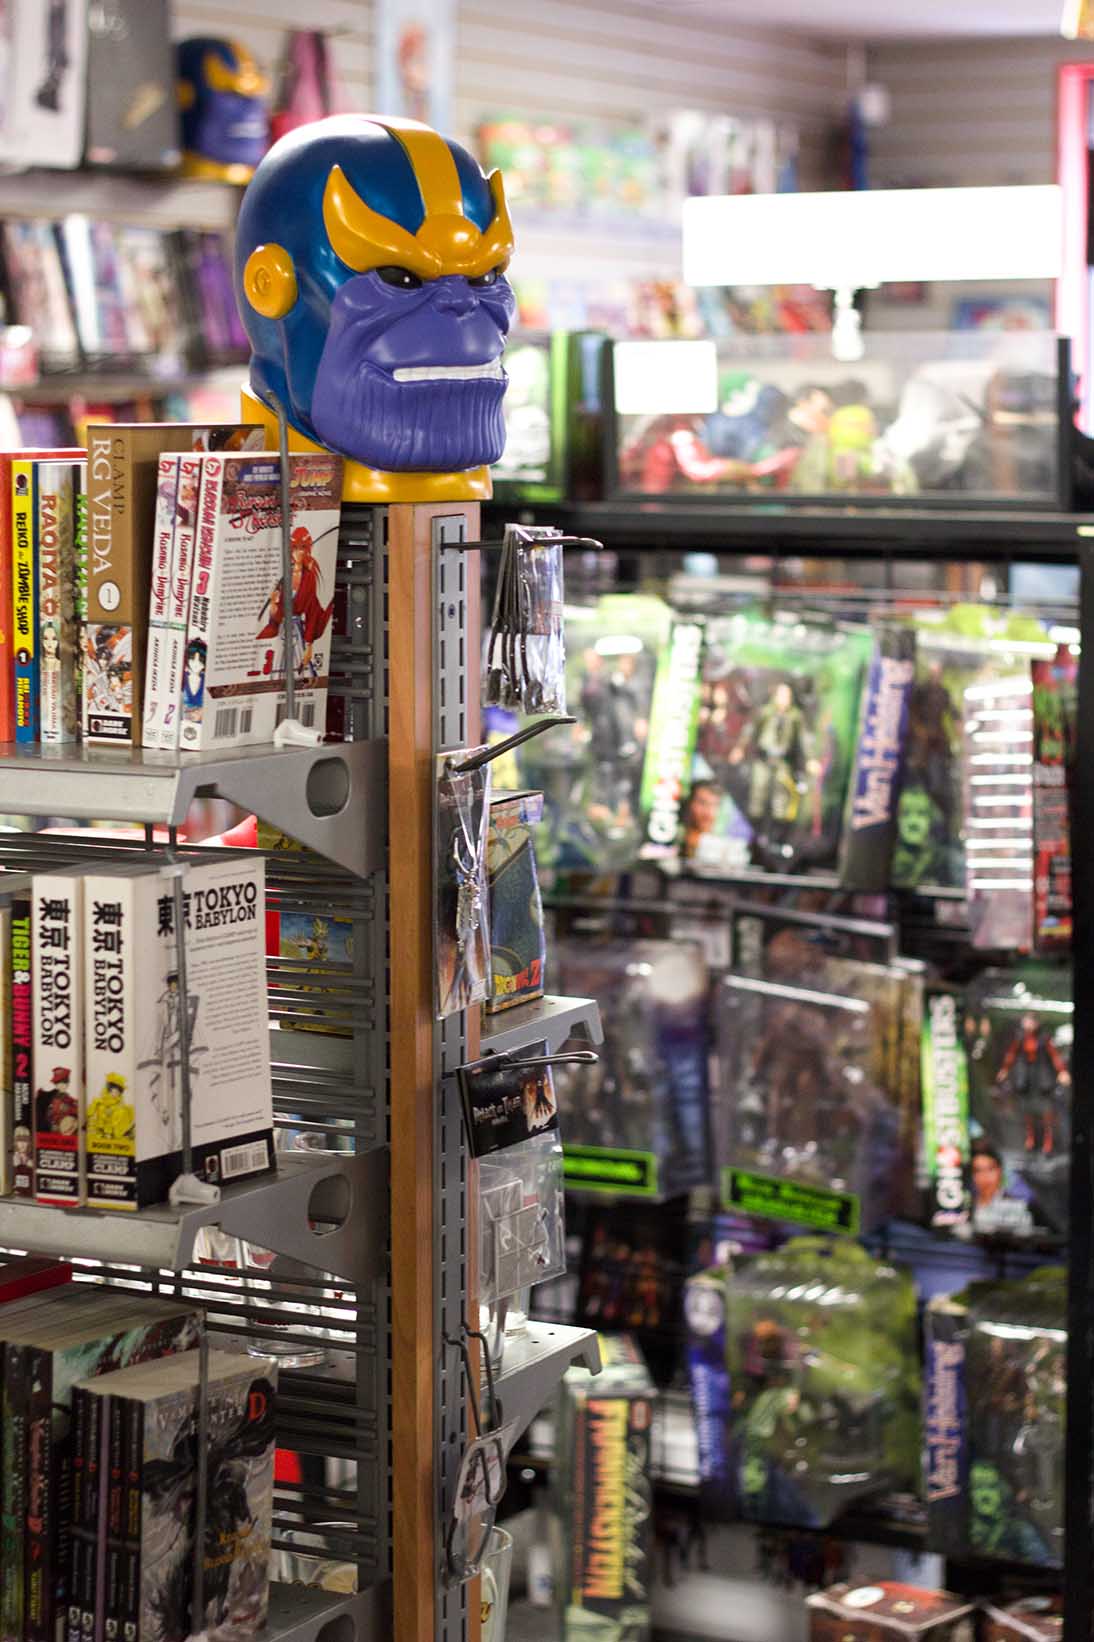 Collected Comics & Games offers a wide variety of comic books, action figures and games. 